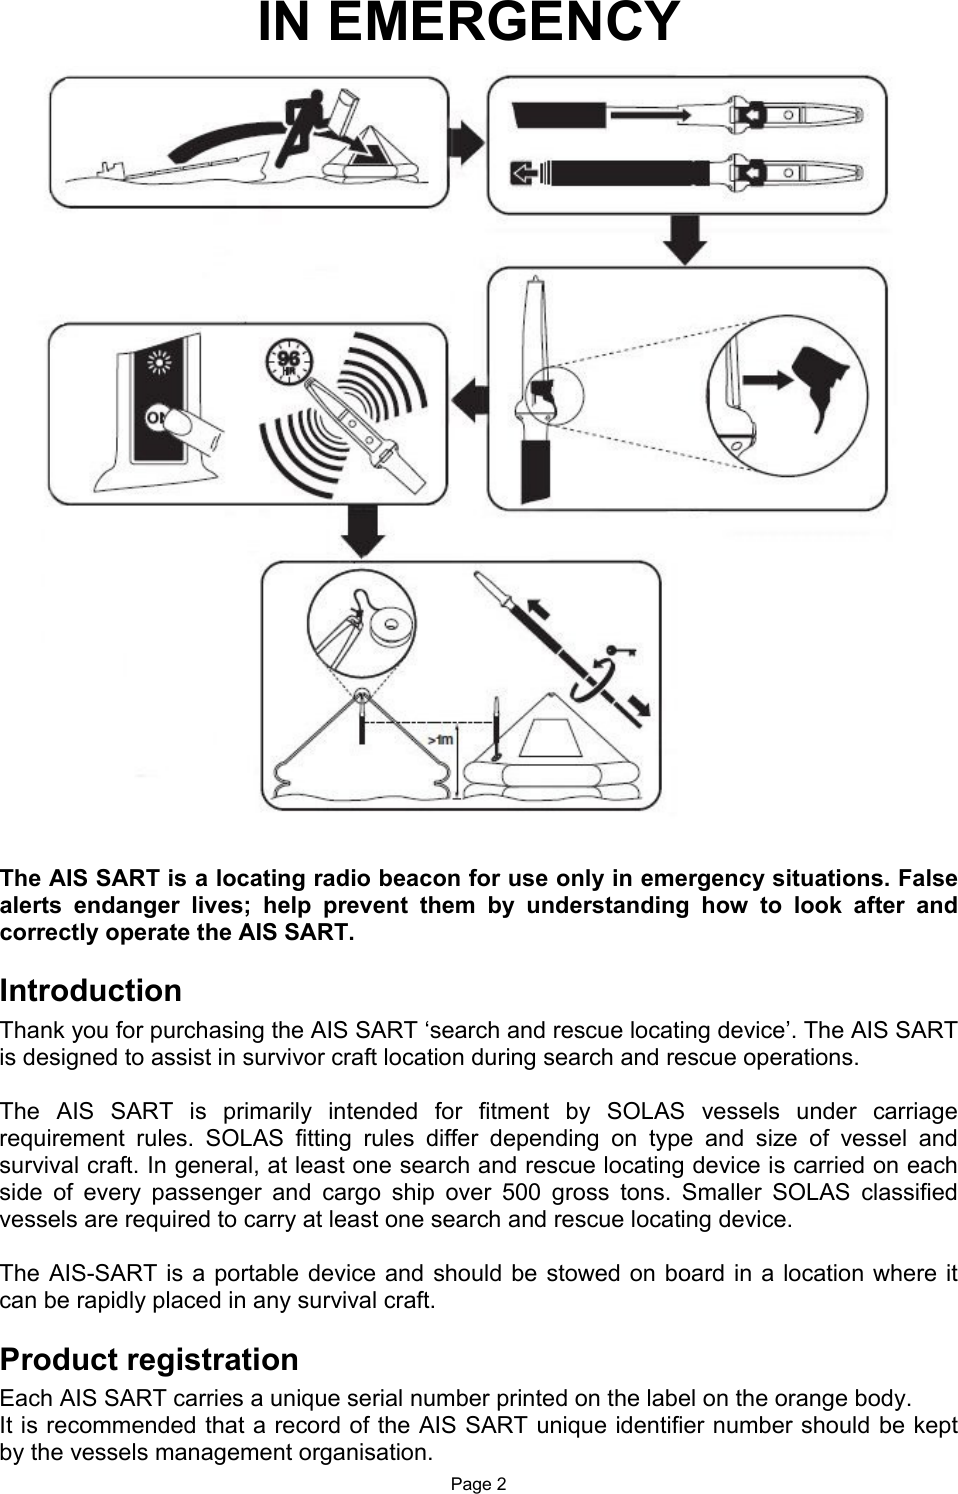  Page 2                               The AIS SART is a locating radio beacon for use only in emergency situations. False alerts  endanger  lives;  help  prevent  them  by  understanding  how  to  look  after  and correctly operate the AIS SART.    Introduction Thank you for purchasing the AIS SART ‘search and rescue locating device’. The AIS SART is designed to assist in survivor craft location during search and rescue operations.   The  AIS  SART  is  primarily  intended  for  fitment  by  SOLAS  vessels  under  carriage requirement  rules.  SOLAS  fitting  rules  differ  depending  on  type  and  size  of  vessel  and survival craft. In general, at least one search and rescue locating device is carried on each side  of  every  passenger  and  cargo  ship  over  500  gross  tons.  Smaller  SOLAS  classified vessels are required to carry at least one search and rescue locating device.  The AIS-SART is a portable device and should be stowed  on board in a location where it can be rapidly placed in any survival craft.   Product registration  Each AIS SART carries a unique serial number printed on the label on the orange body. It is recommended that a record of the AIS SART unique identifier number should be kept by the vessels management organisation.   IN EMERGENCY 